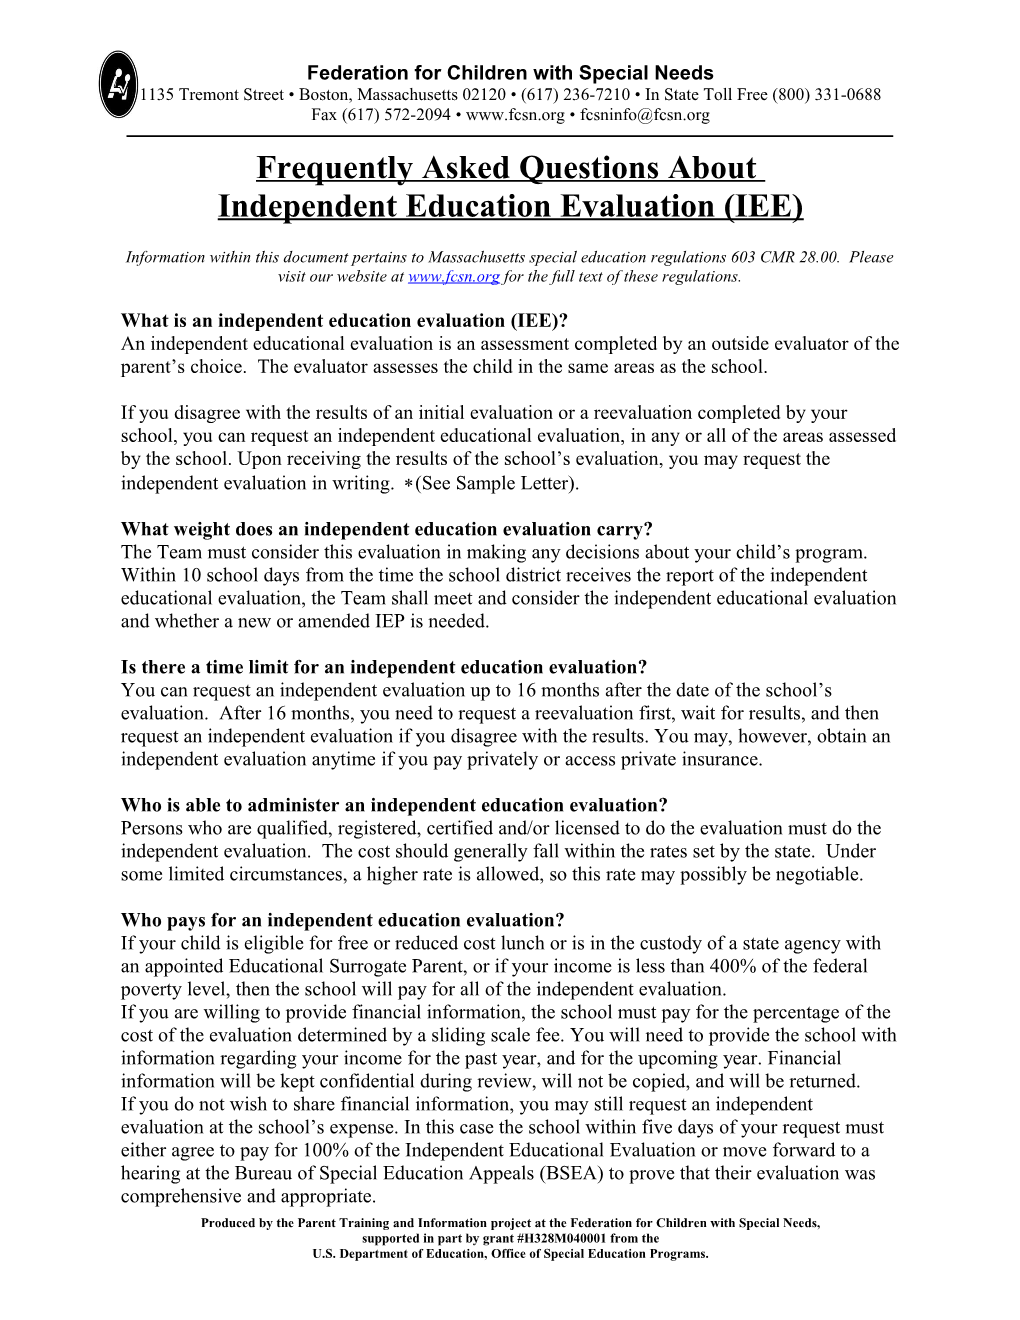 Information Within This Document Pertains to Massachusetts Special Education Regulations